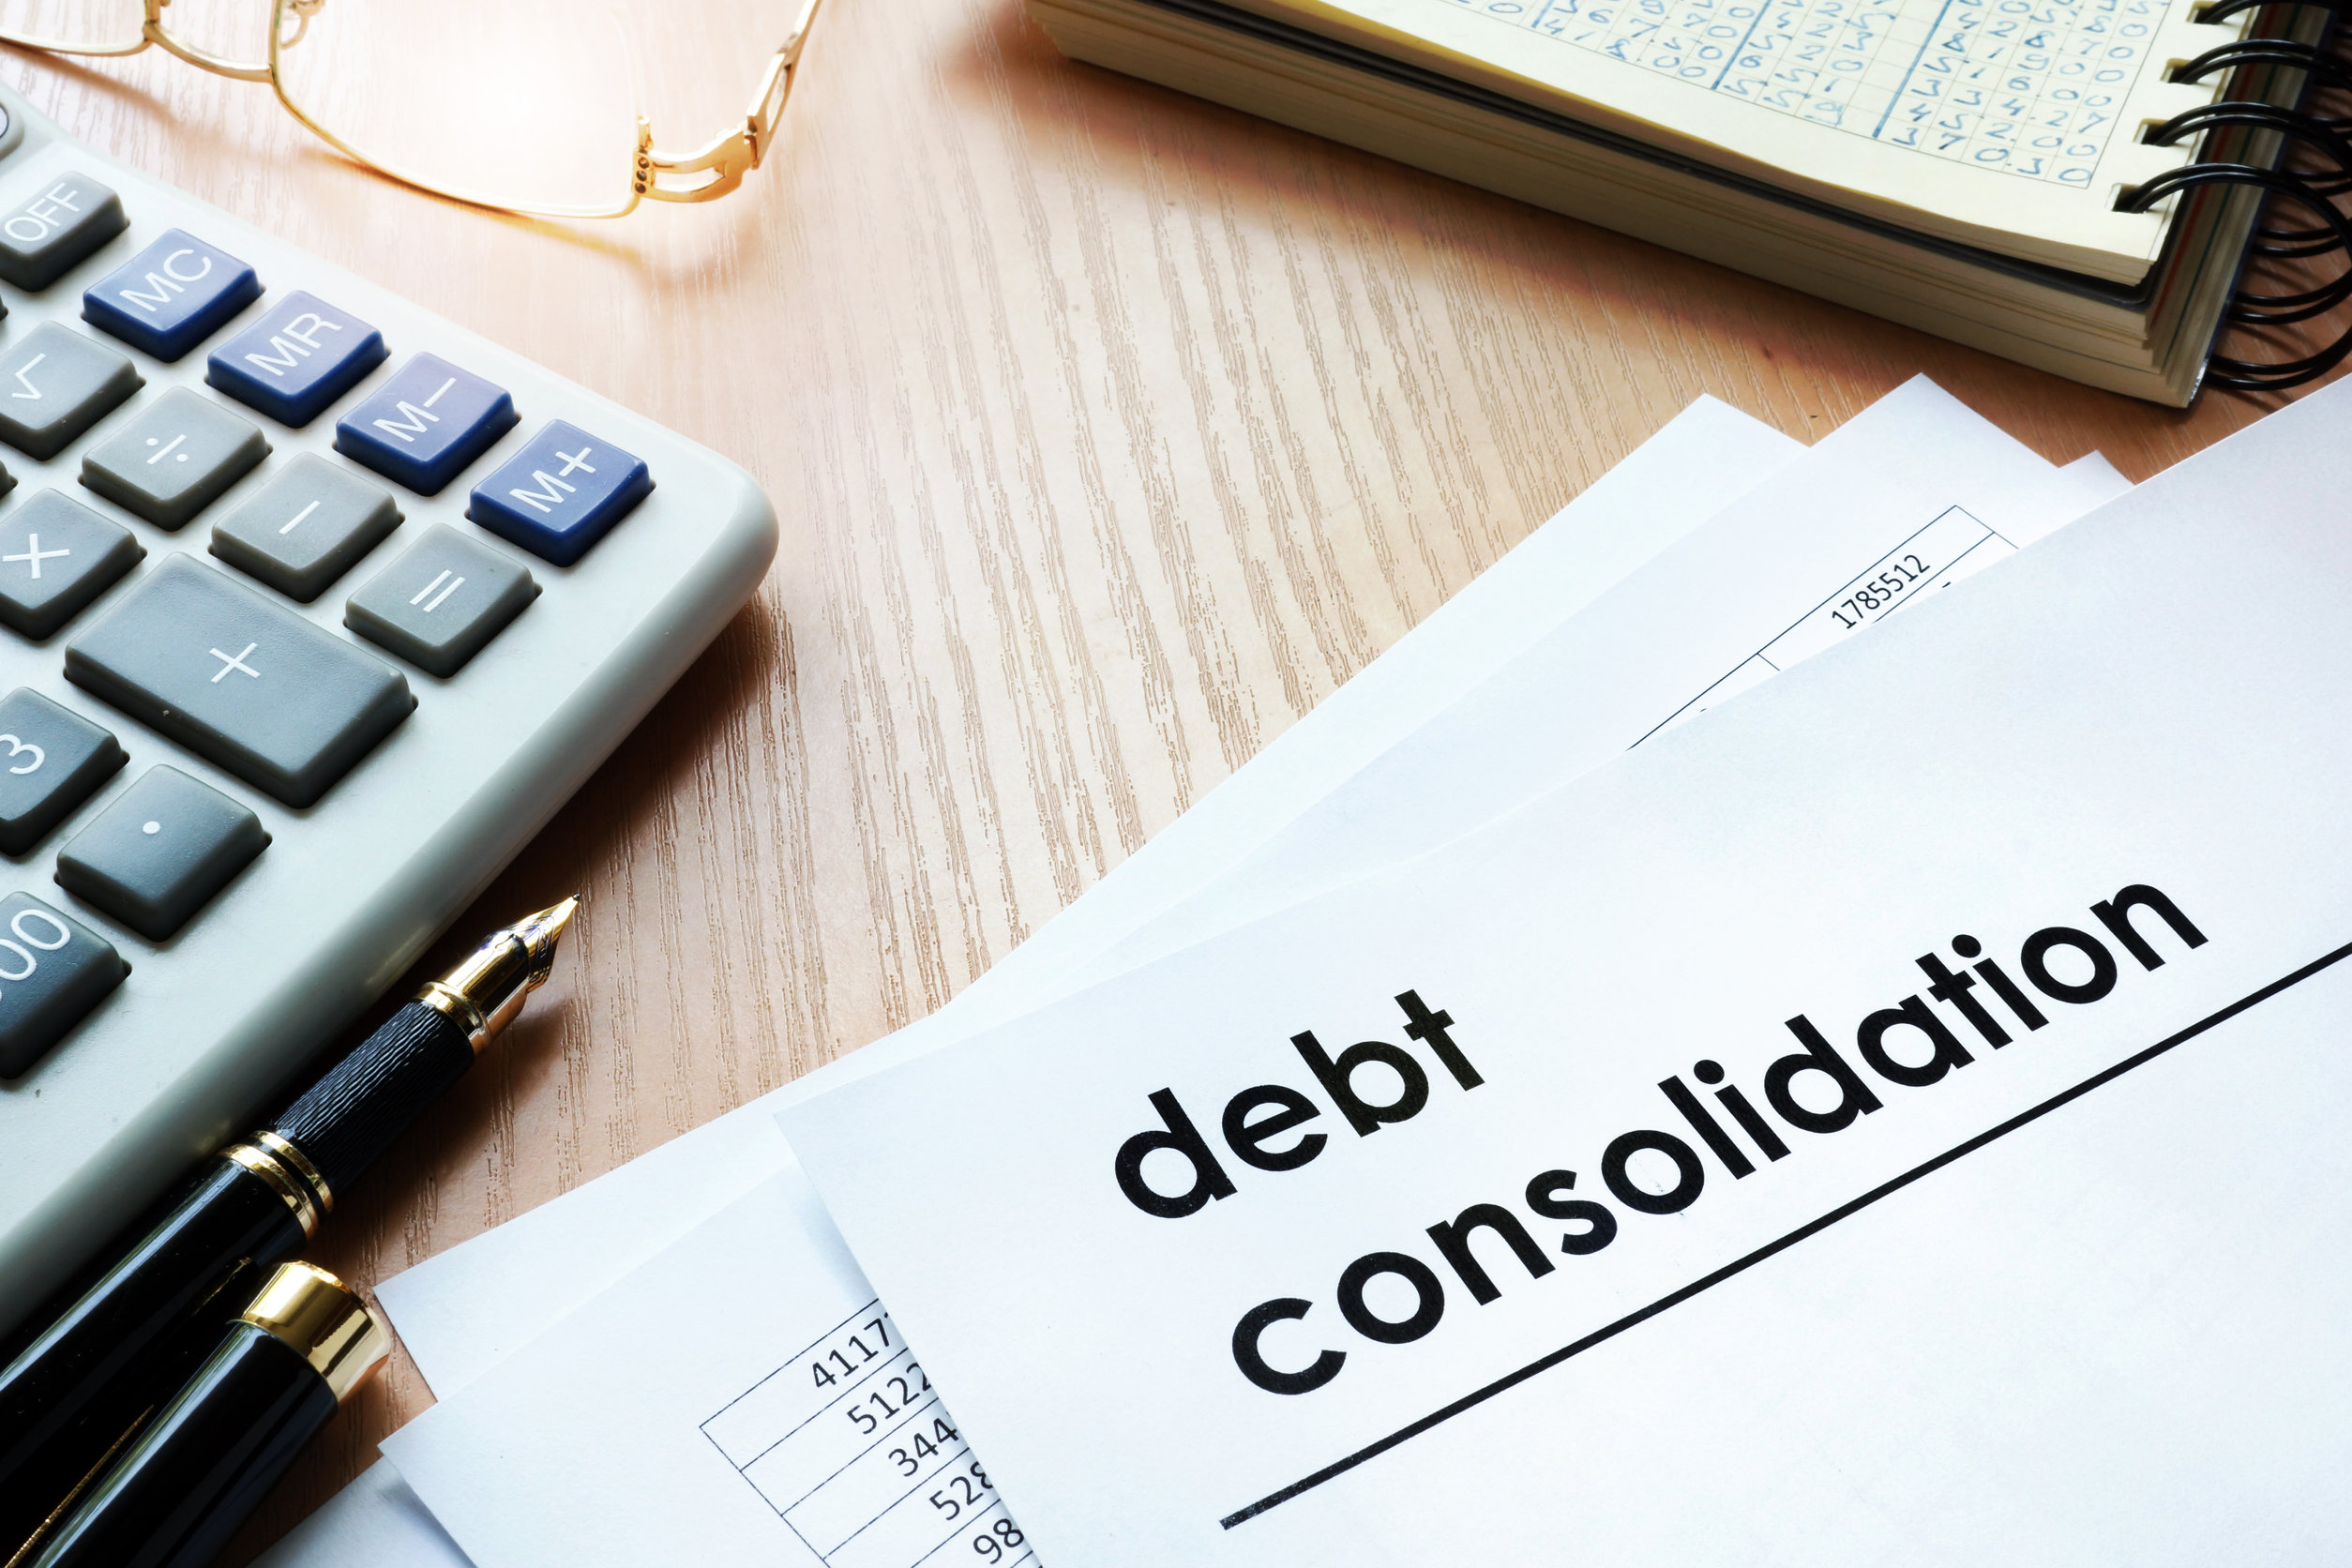 Need Help With Debt Consolidation? Read This!